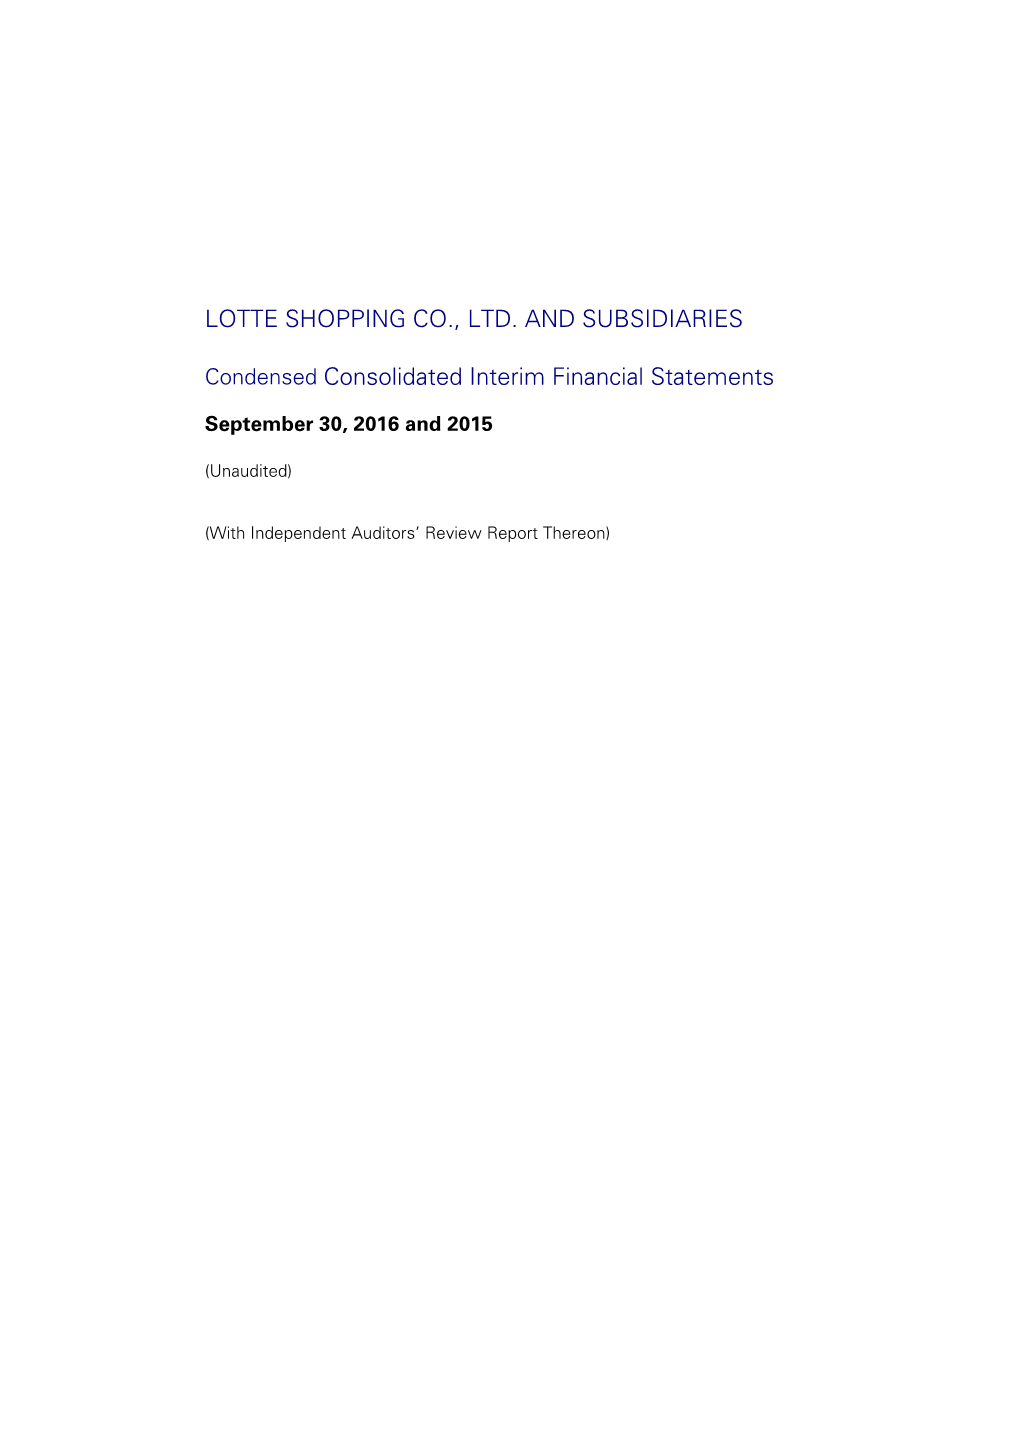 LOTTE SHOPPING CO., LTD. and SUBSIDIARIES Condensed Consolidated Interim Statements of Financial Position